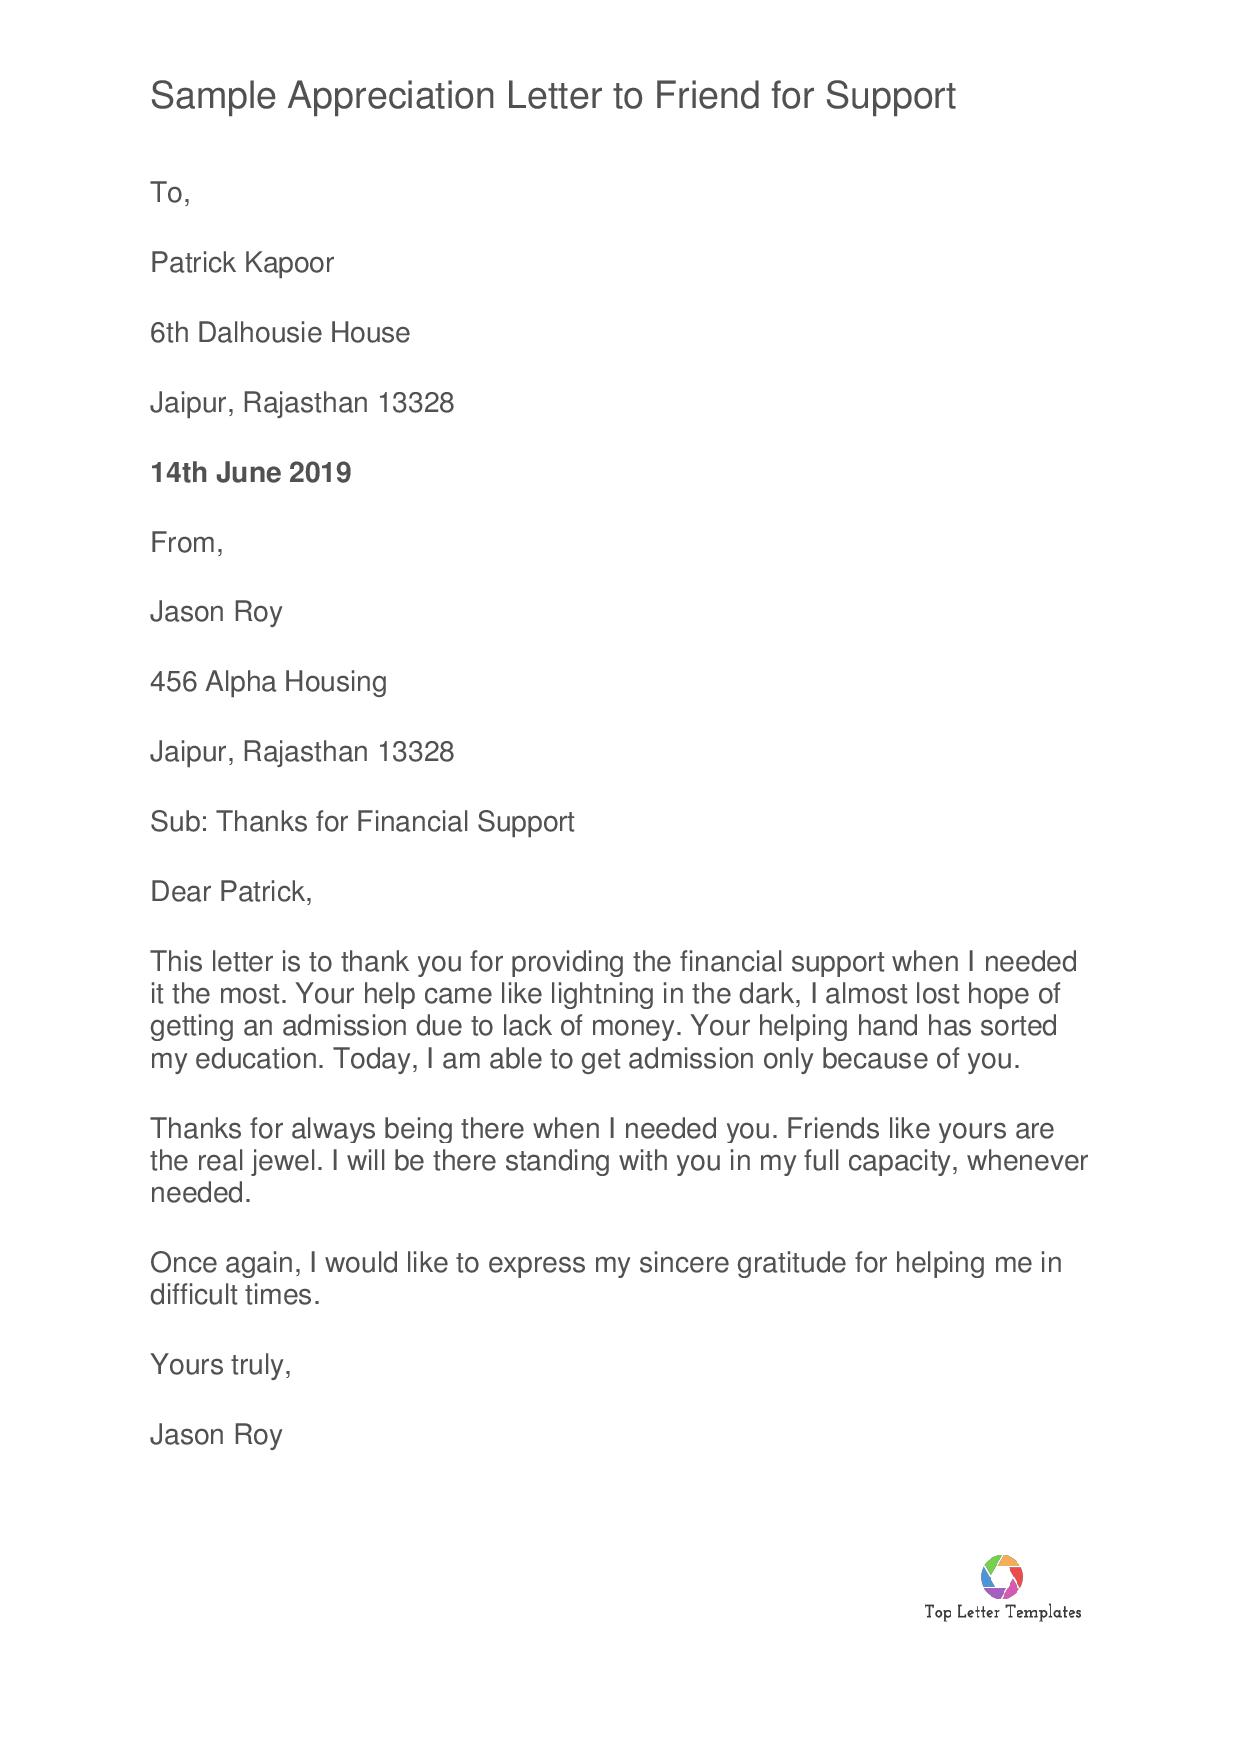 Sample Letter of Appreciation for Support Pdf, Doc Top